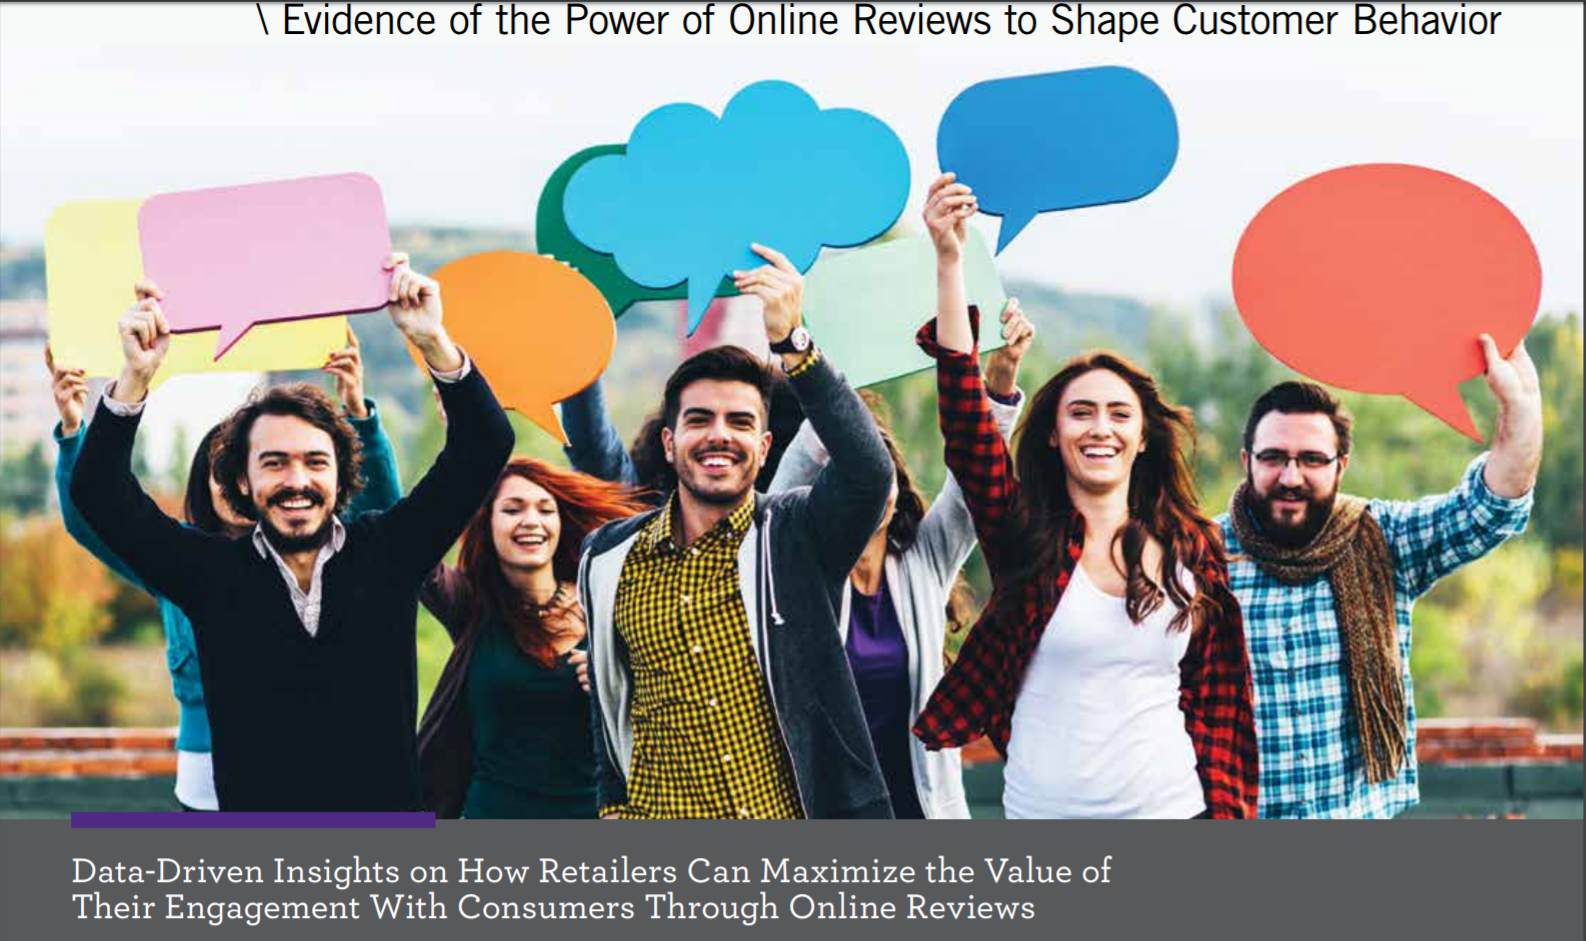 Spiegel Research Center's data-driven insights on how retailers can maximize the value of their engagement with consumers through onine reviews.